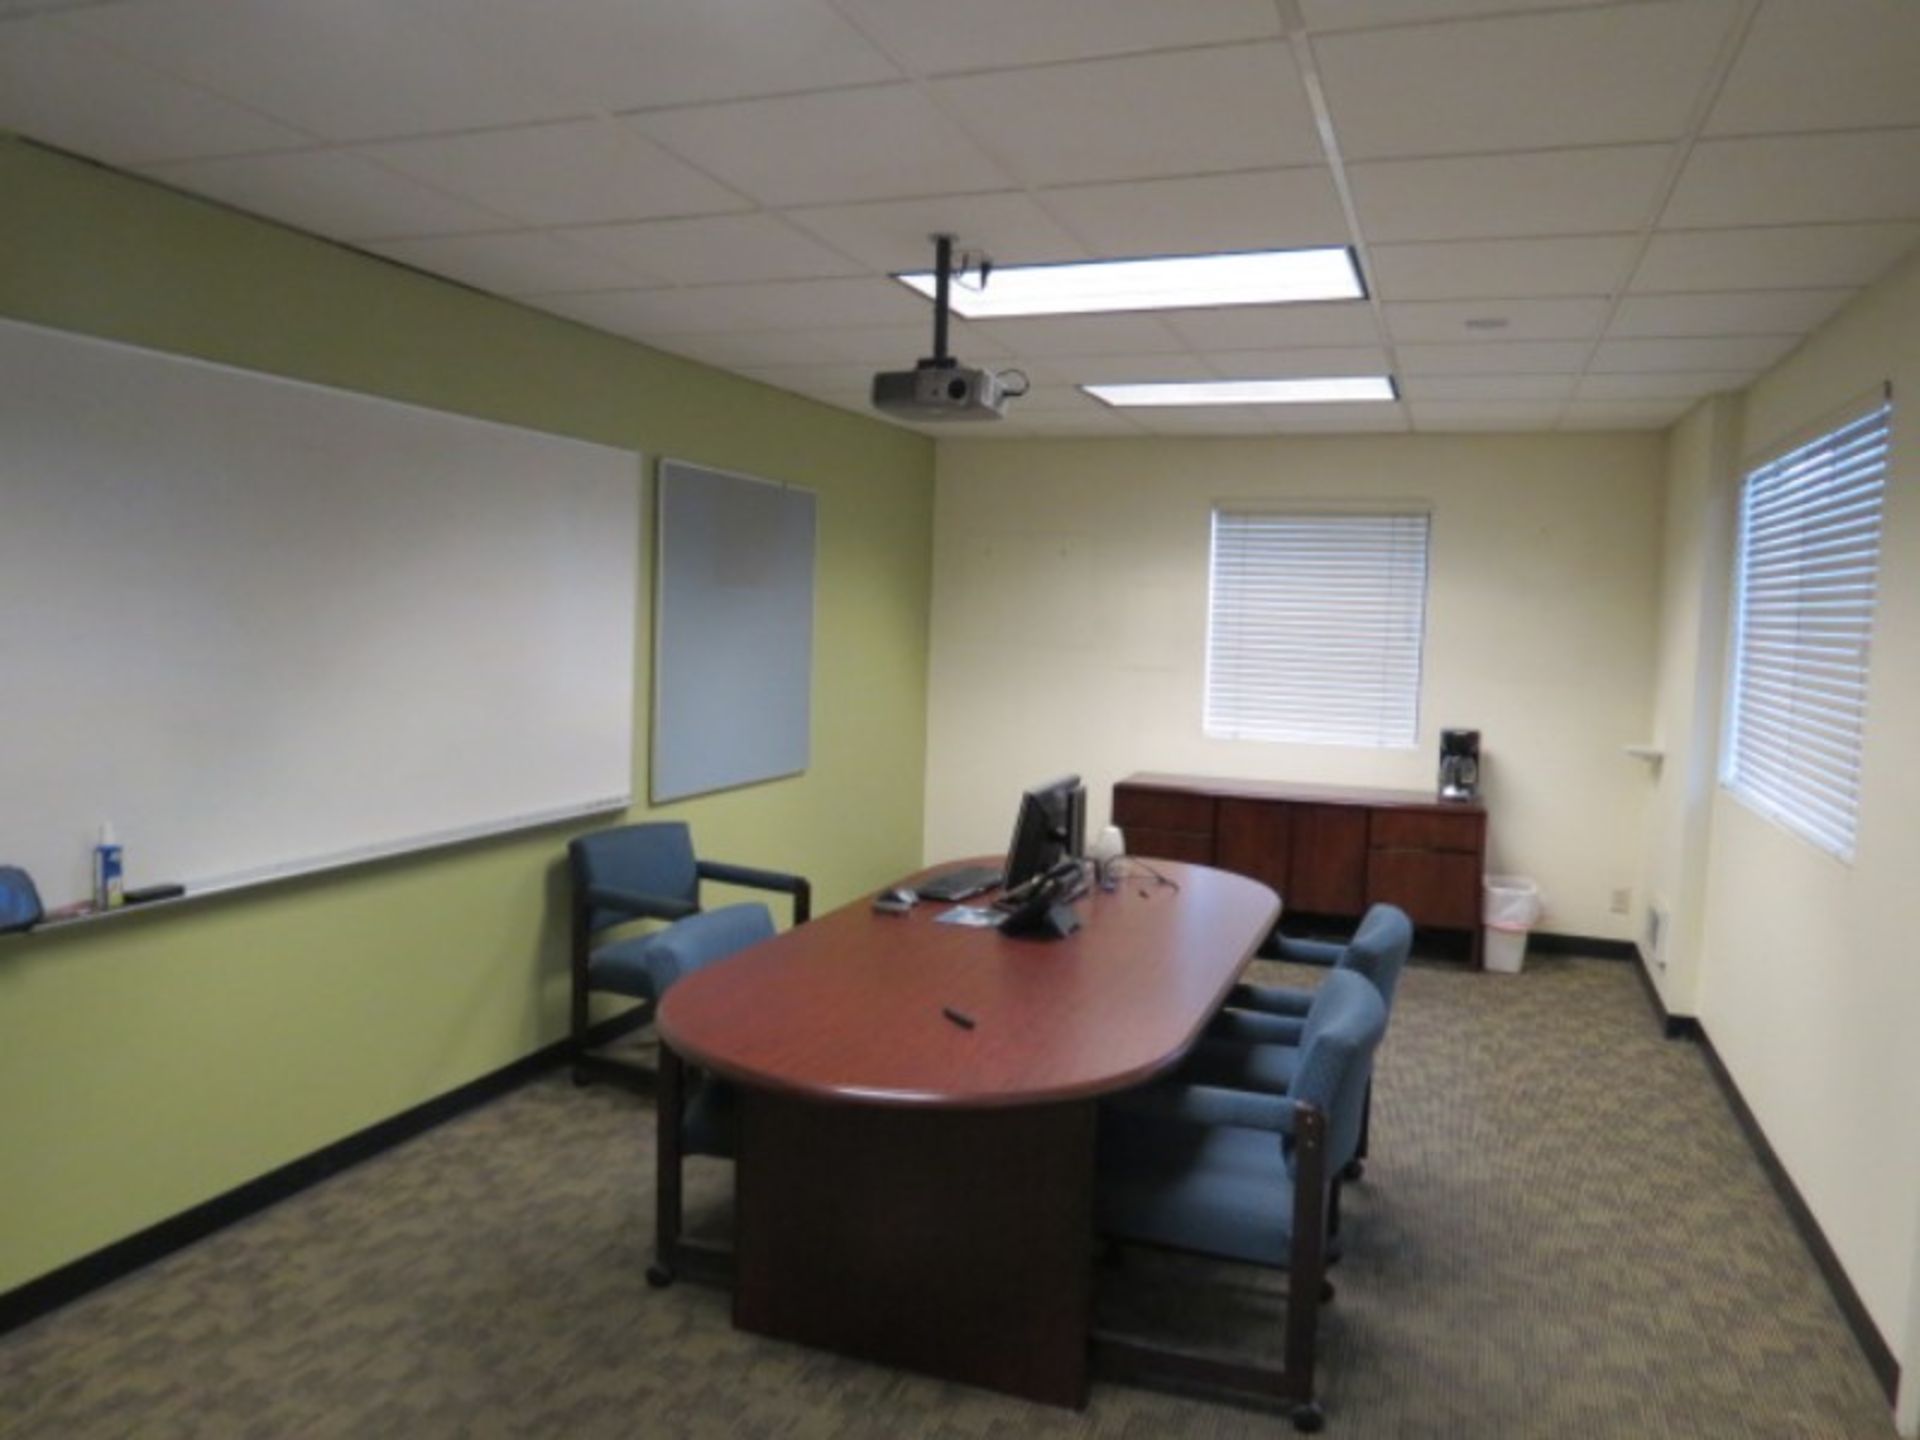 Room Content, Conference Table with Chairs & Projector - Image 2 of 9